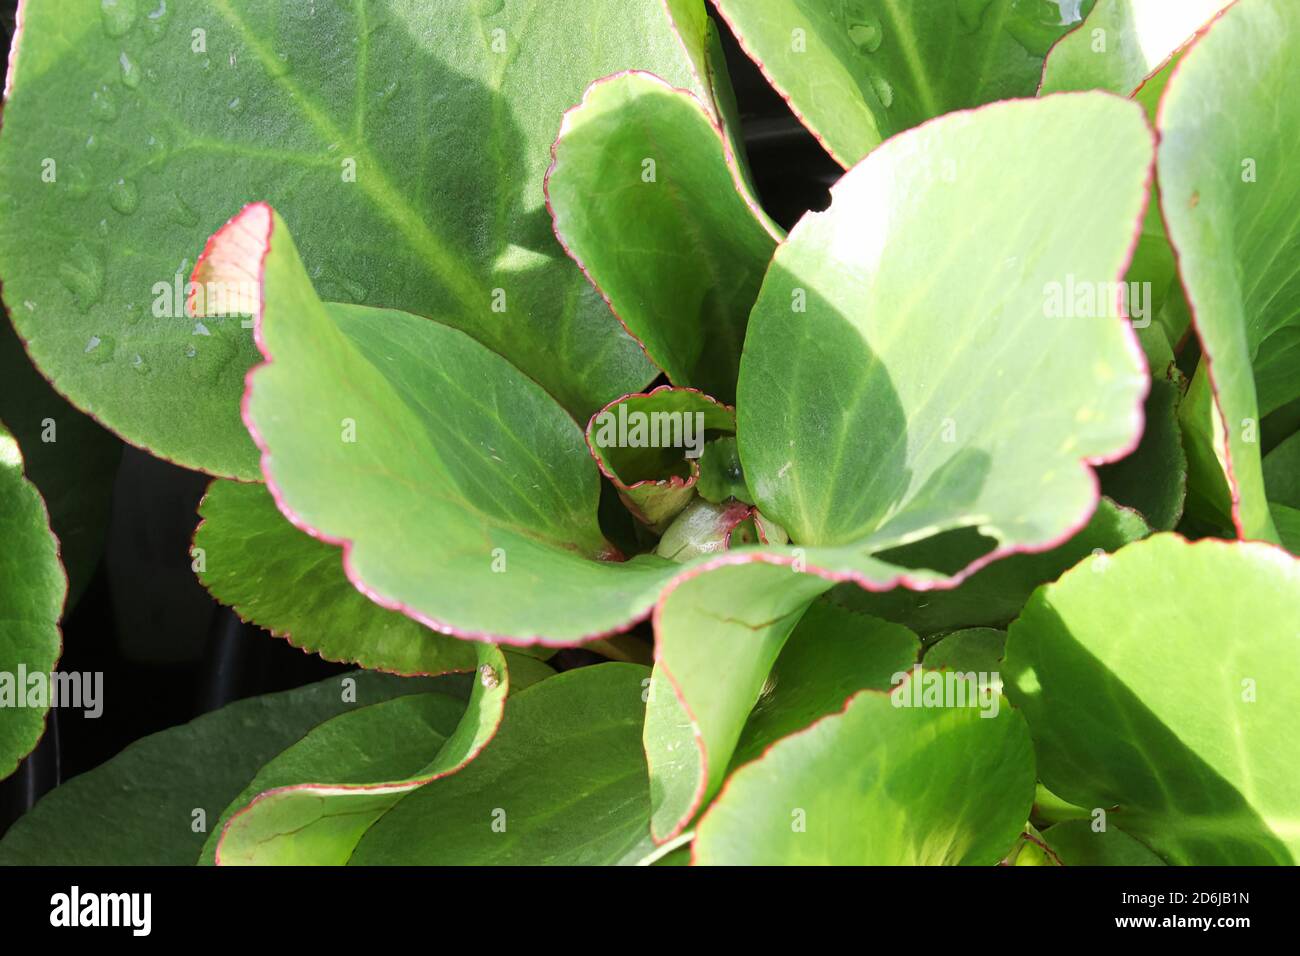 Green and red edges leaves of a bergenia plant Stock Photo